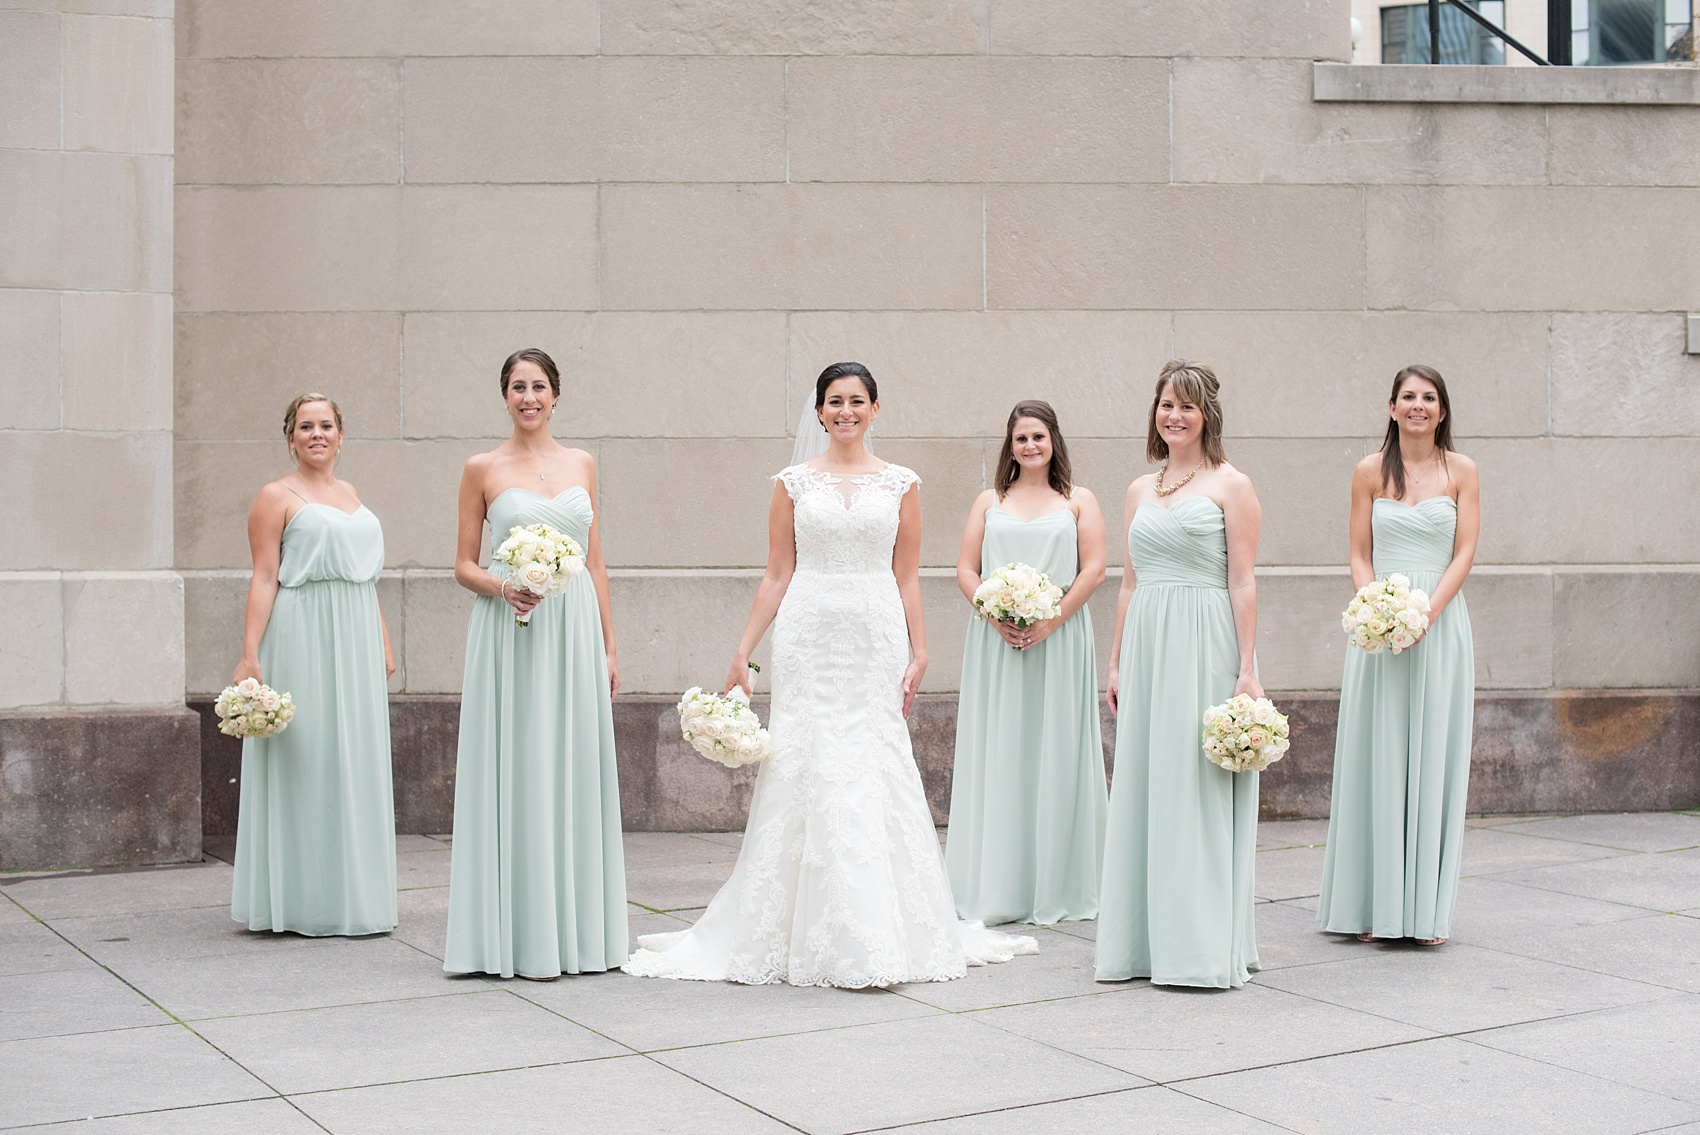 Mikkel Paige Photography photos of a wedding in downtown Chicago at The Rookery. The bride and her bridesmaids in mint green gowns by Alfred Angelo took photos by the waterfront on Riverwalk.